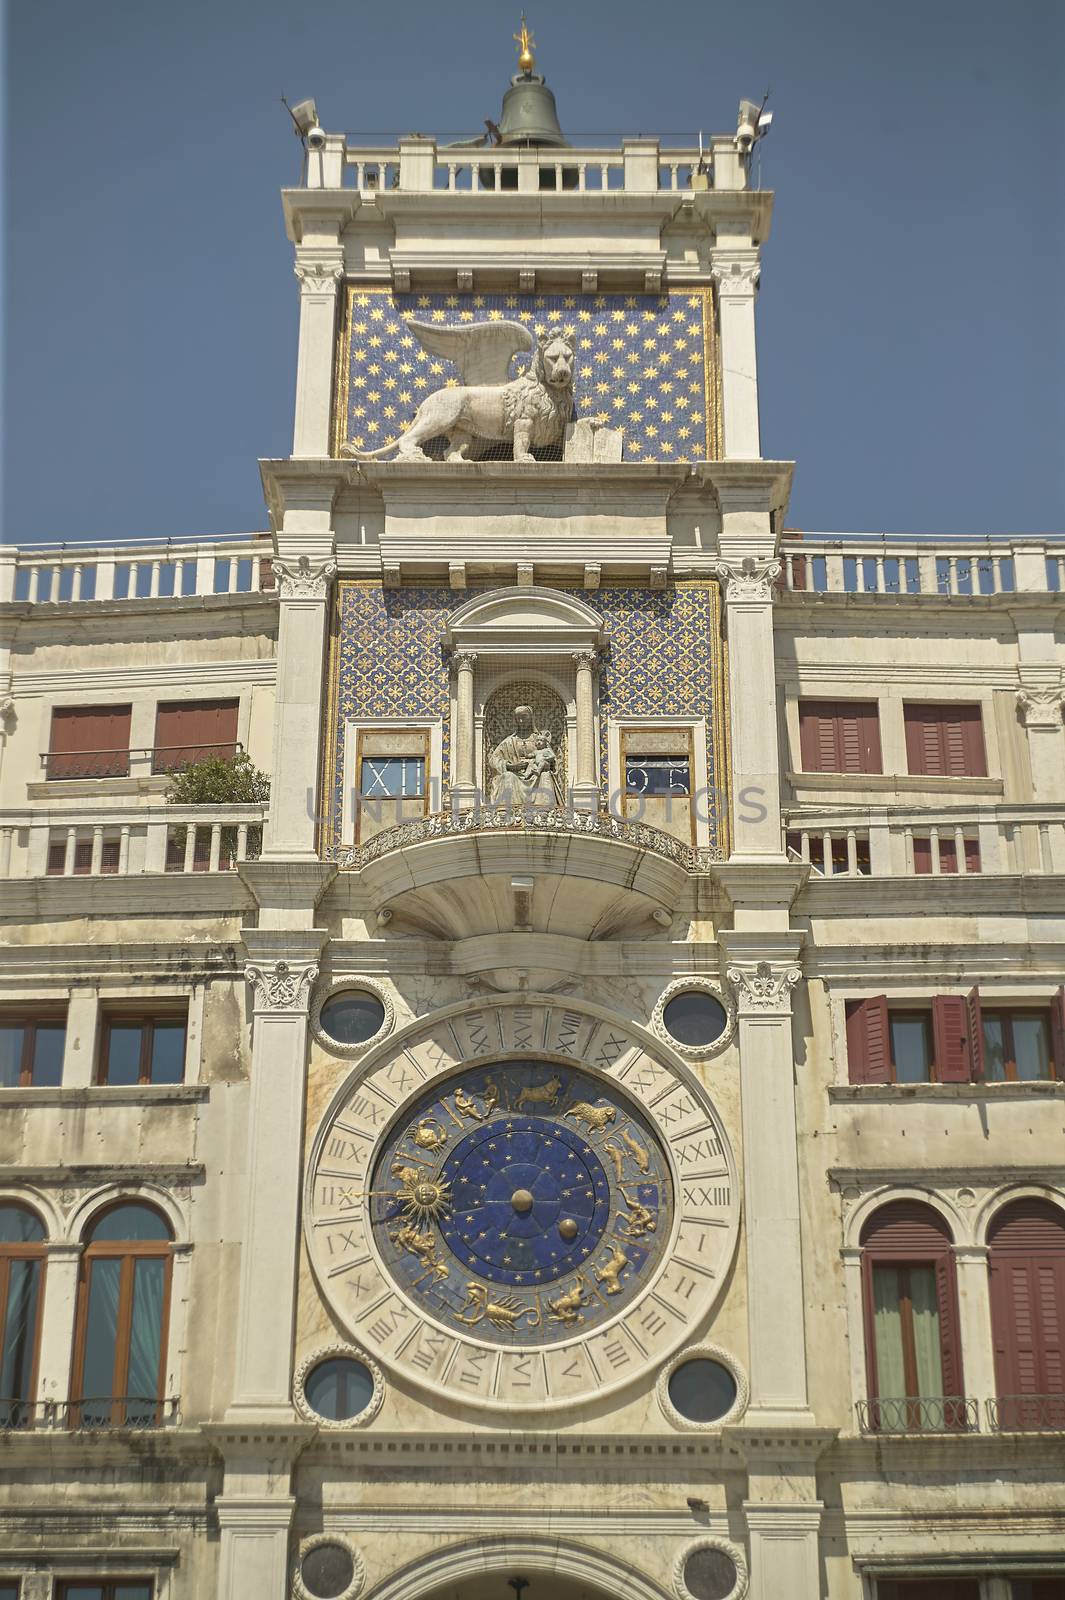 From the bottom of the clock tower in Piazza San Marco in Venice, with its distinctive clock visible.